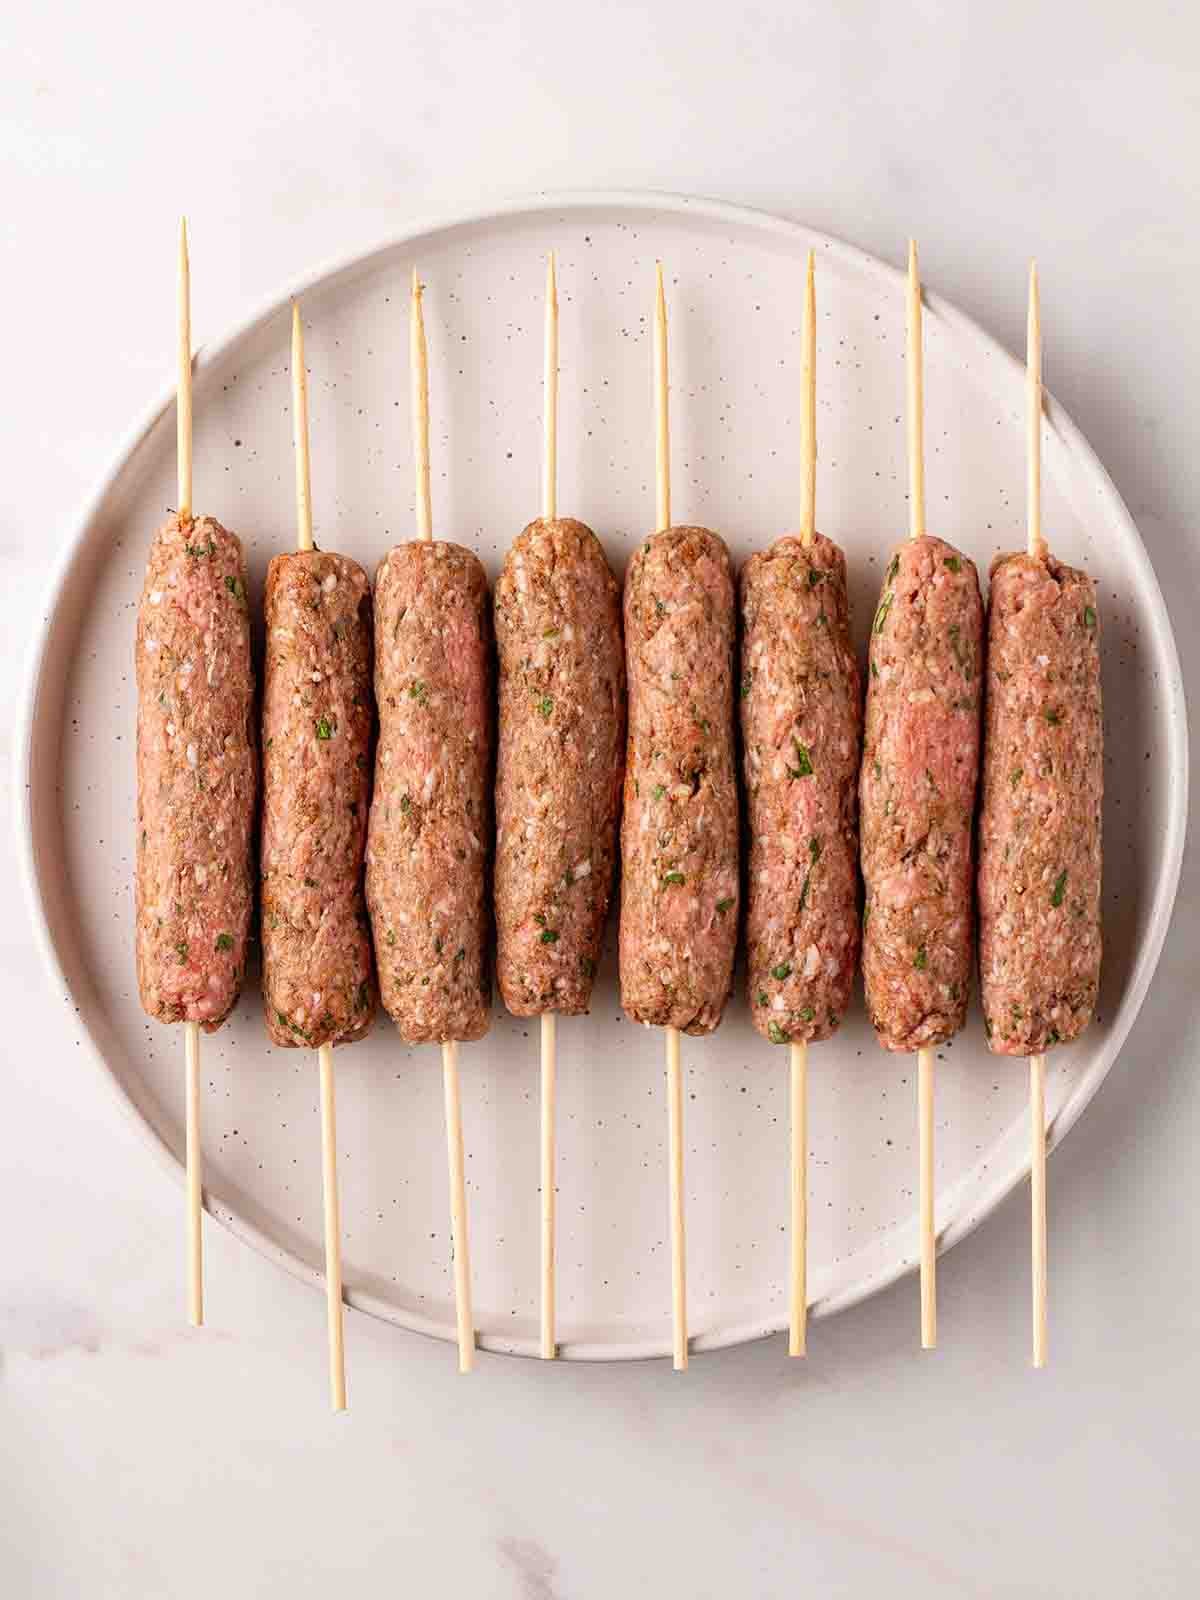 Raw lamb kofta kebabs with skewers through the middle, on a plate, ready to be cooked.